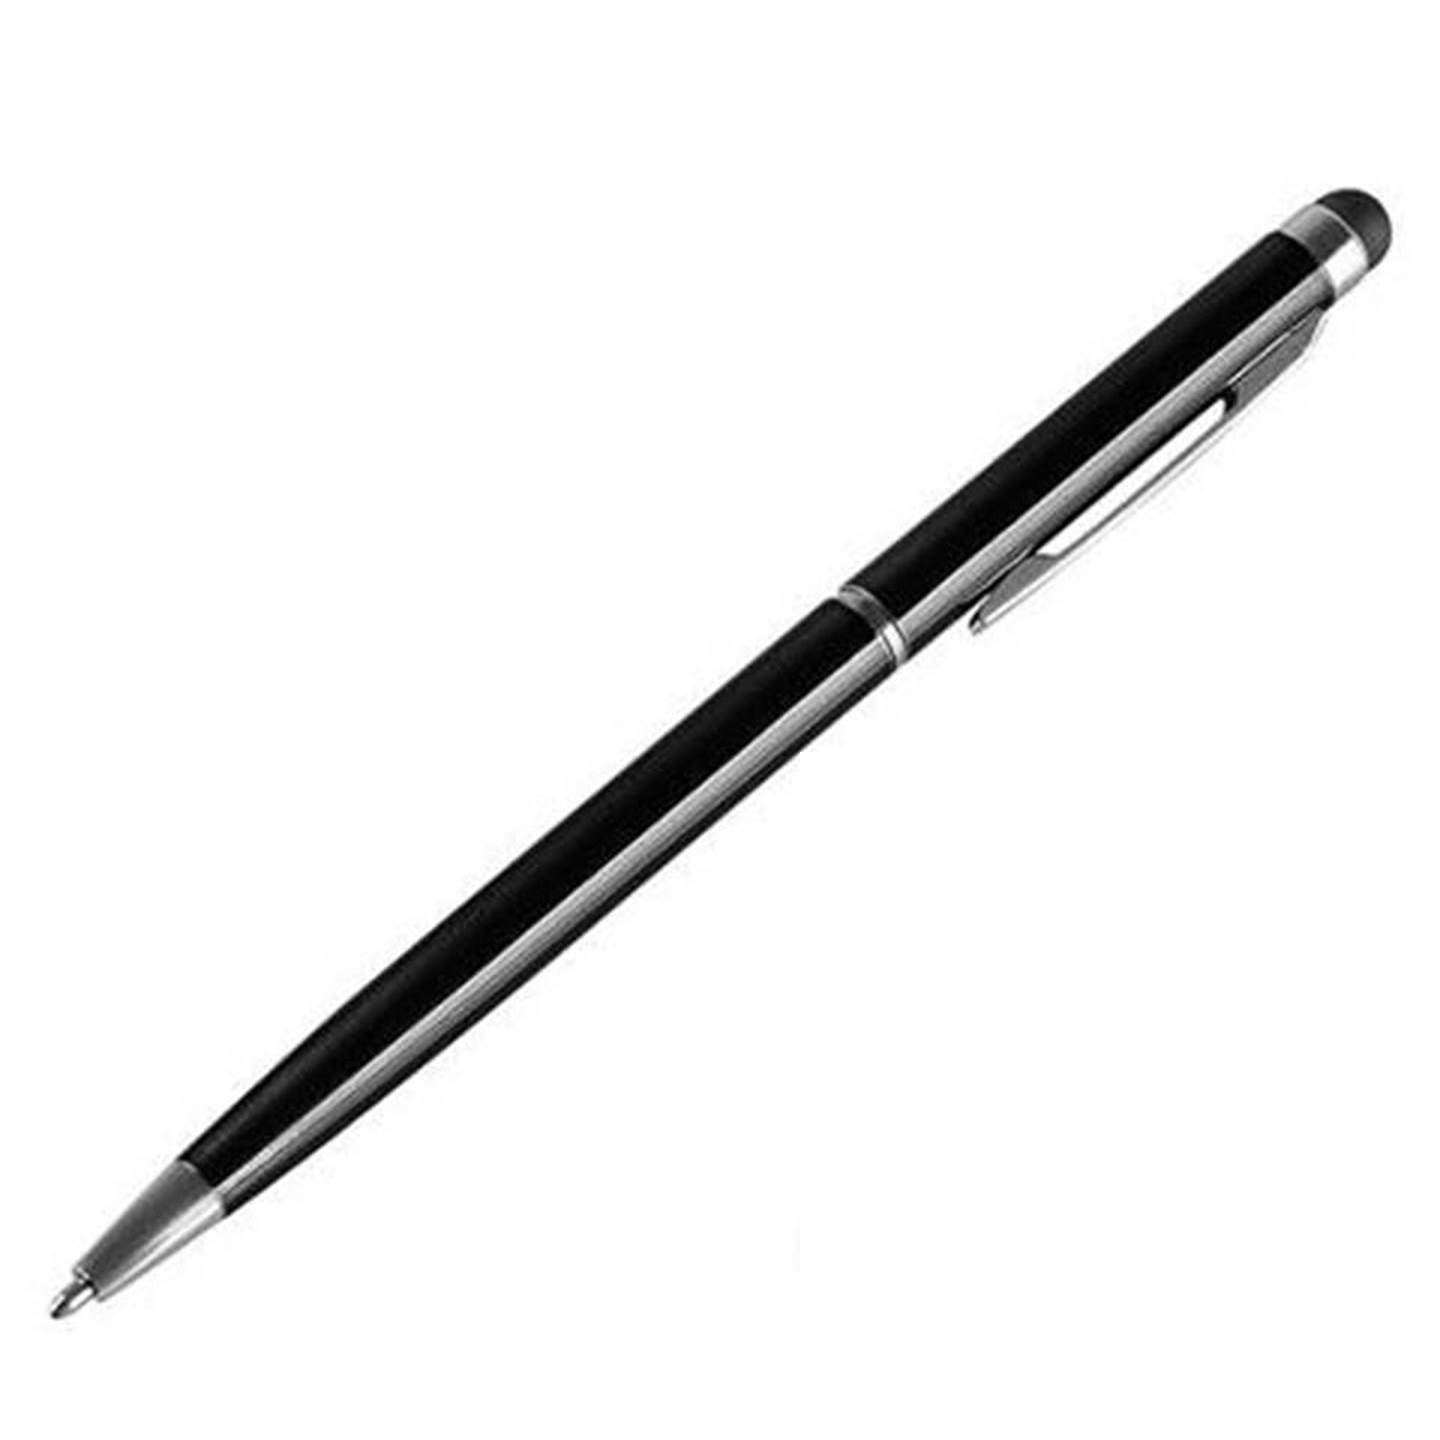 Ballpoint Pen iPad iPhone Smartphone Tablet 10 Black 2-in-1 Touch Screen Stylus